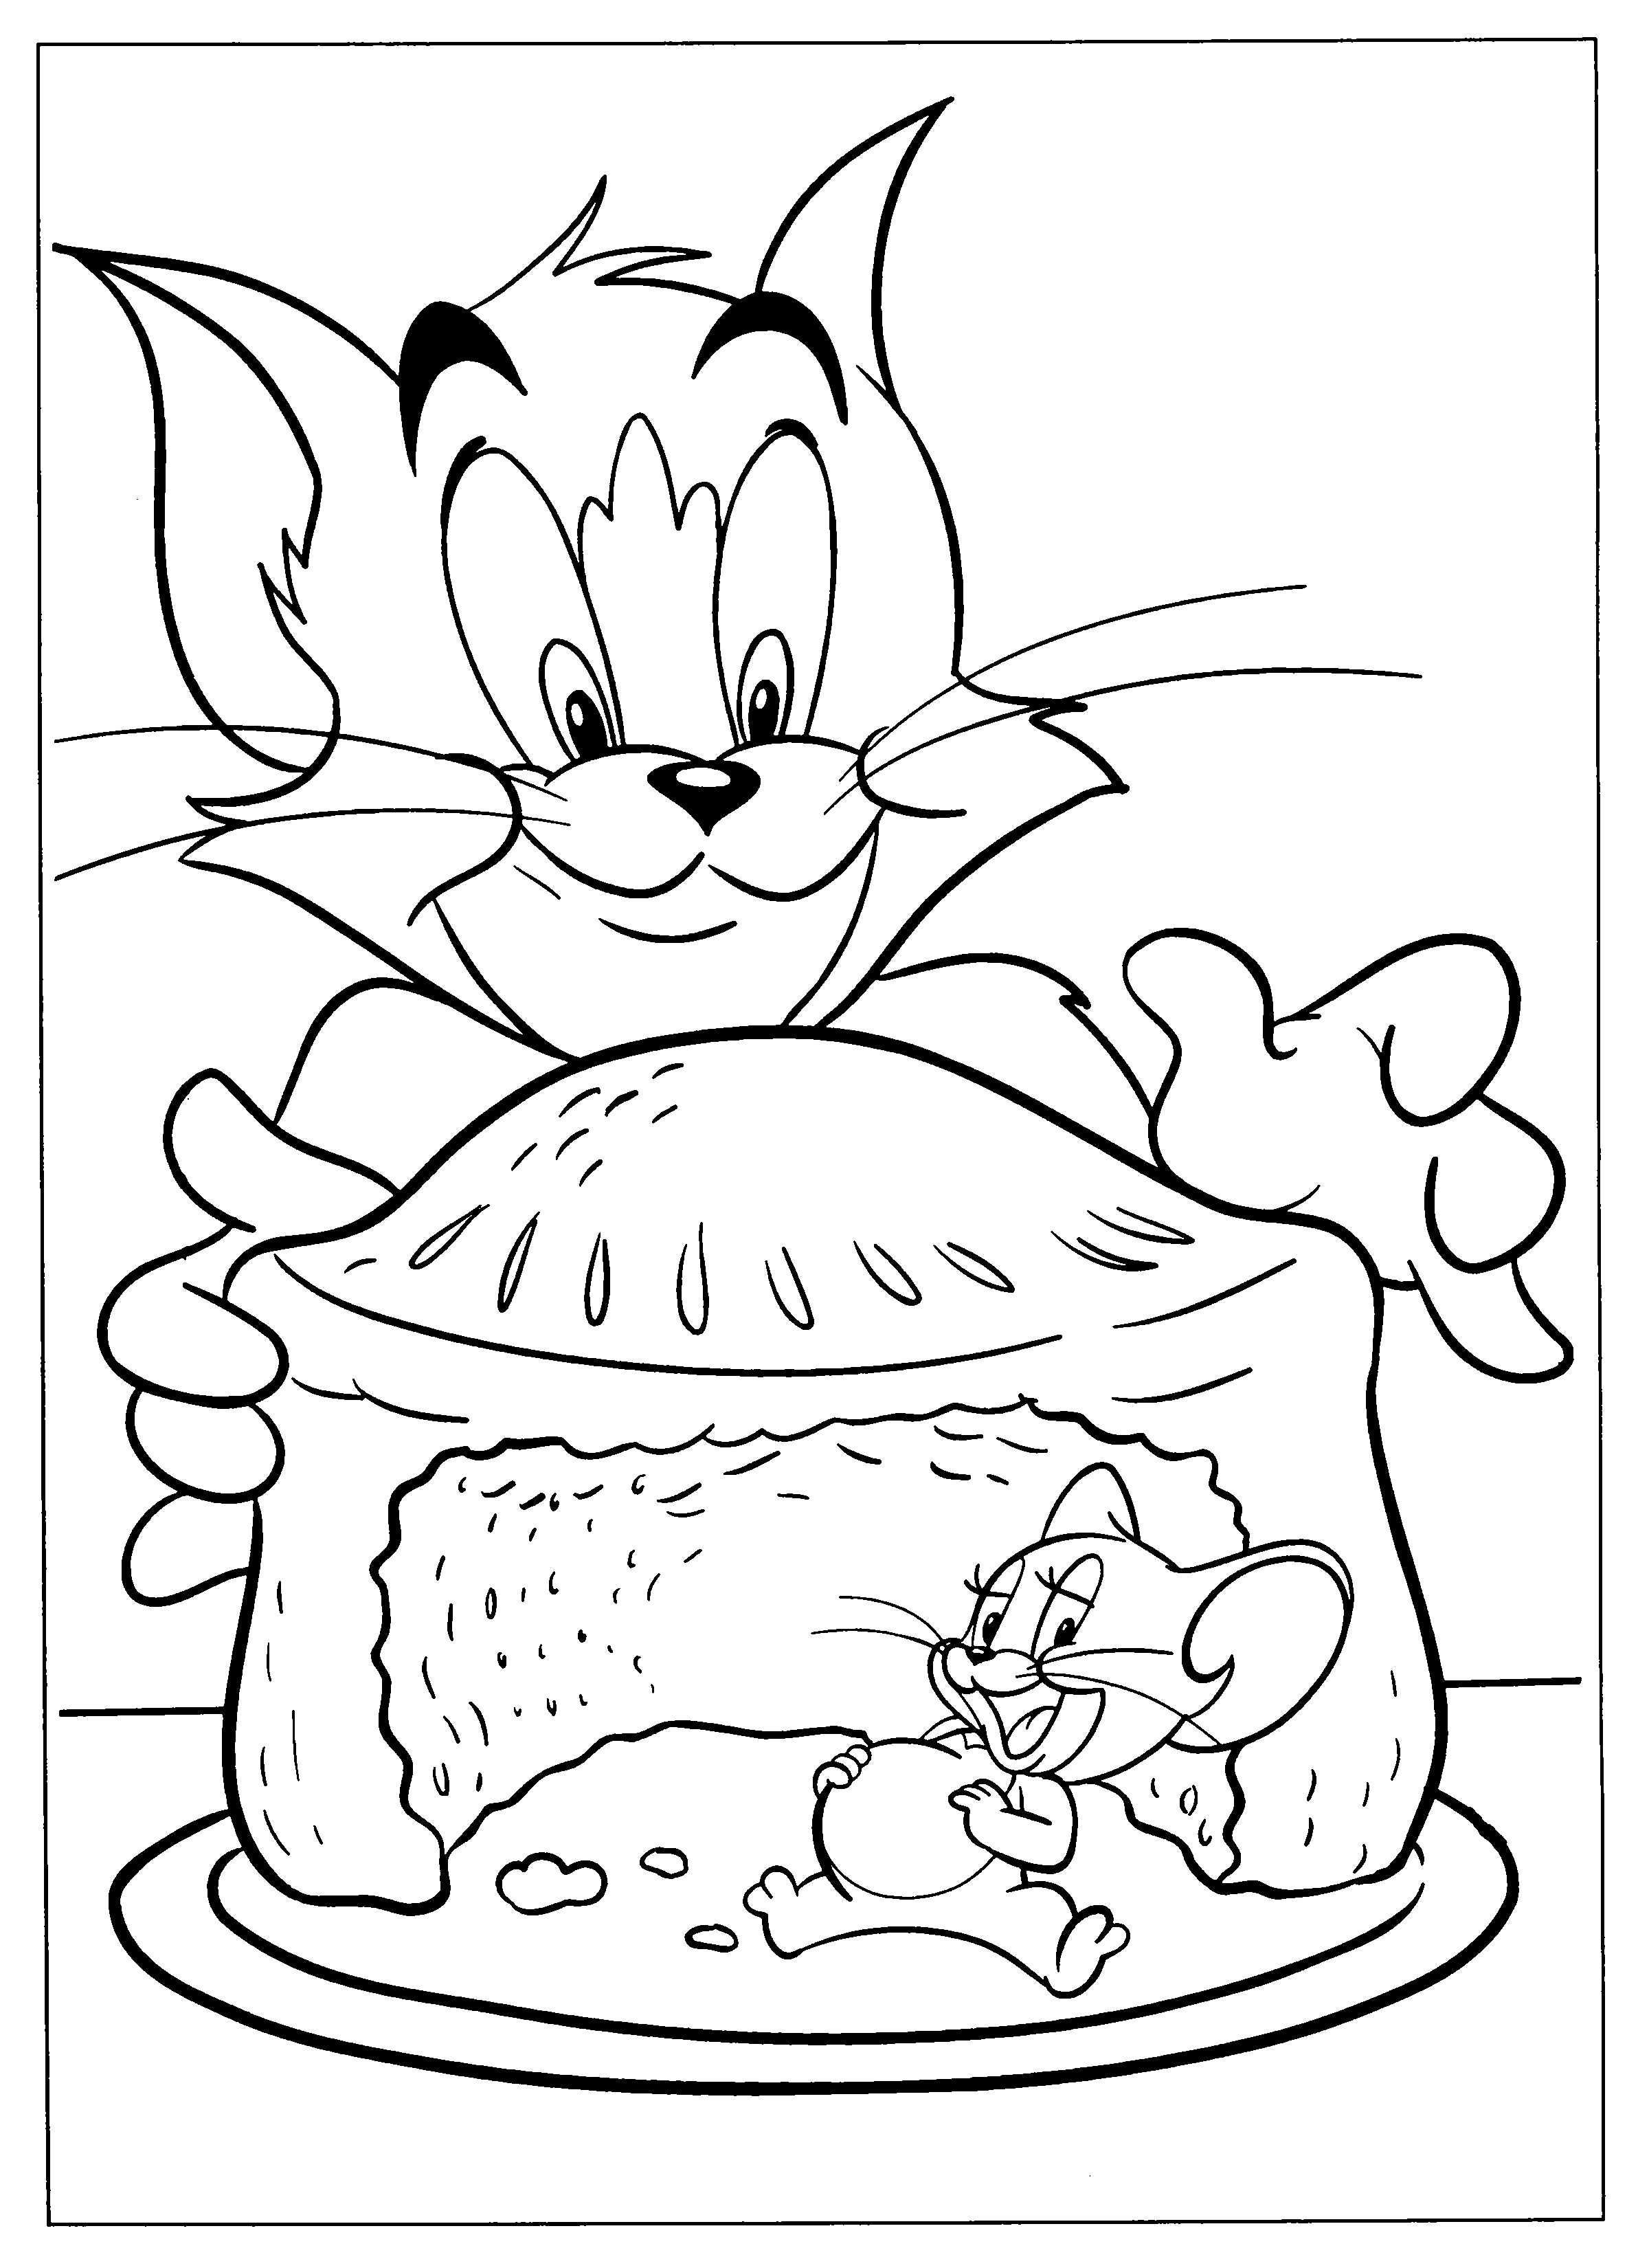 Tom And Jerry Coloring Sheets Printables - High Quality Coloring Pages